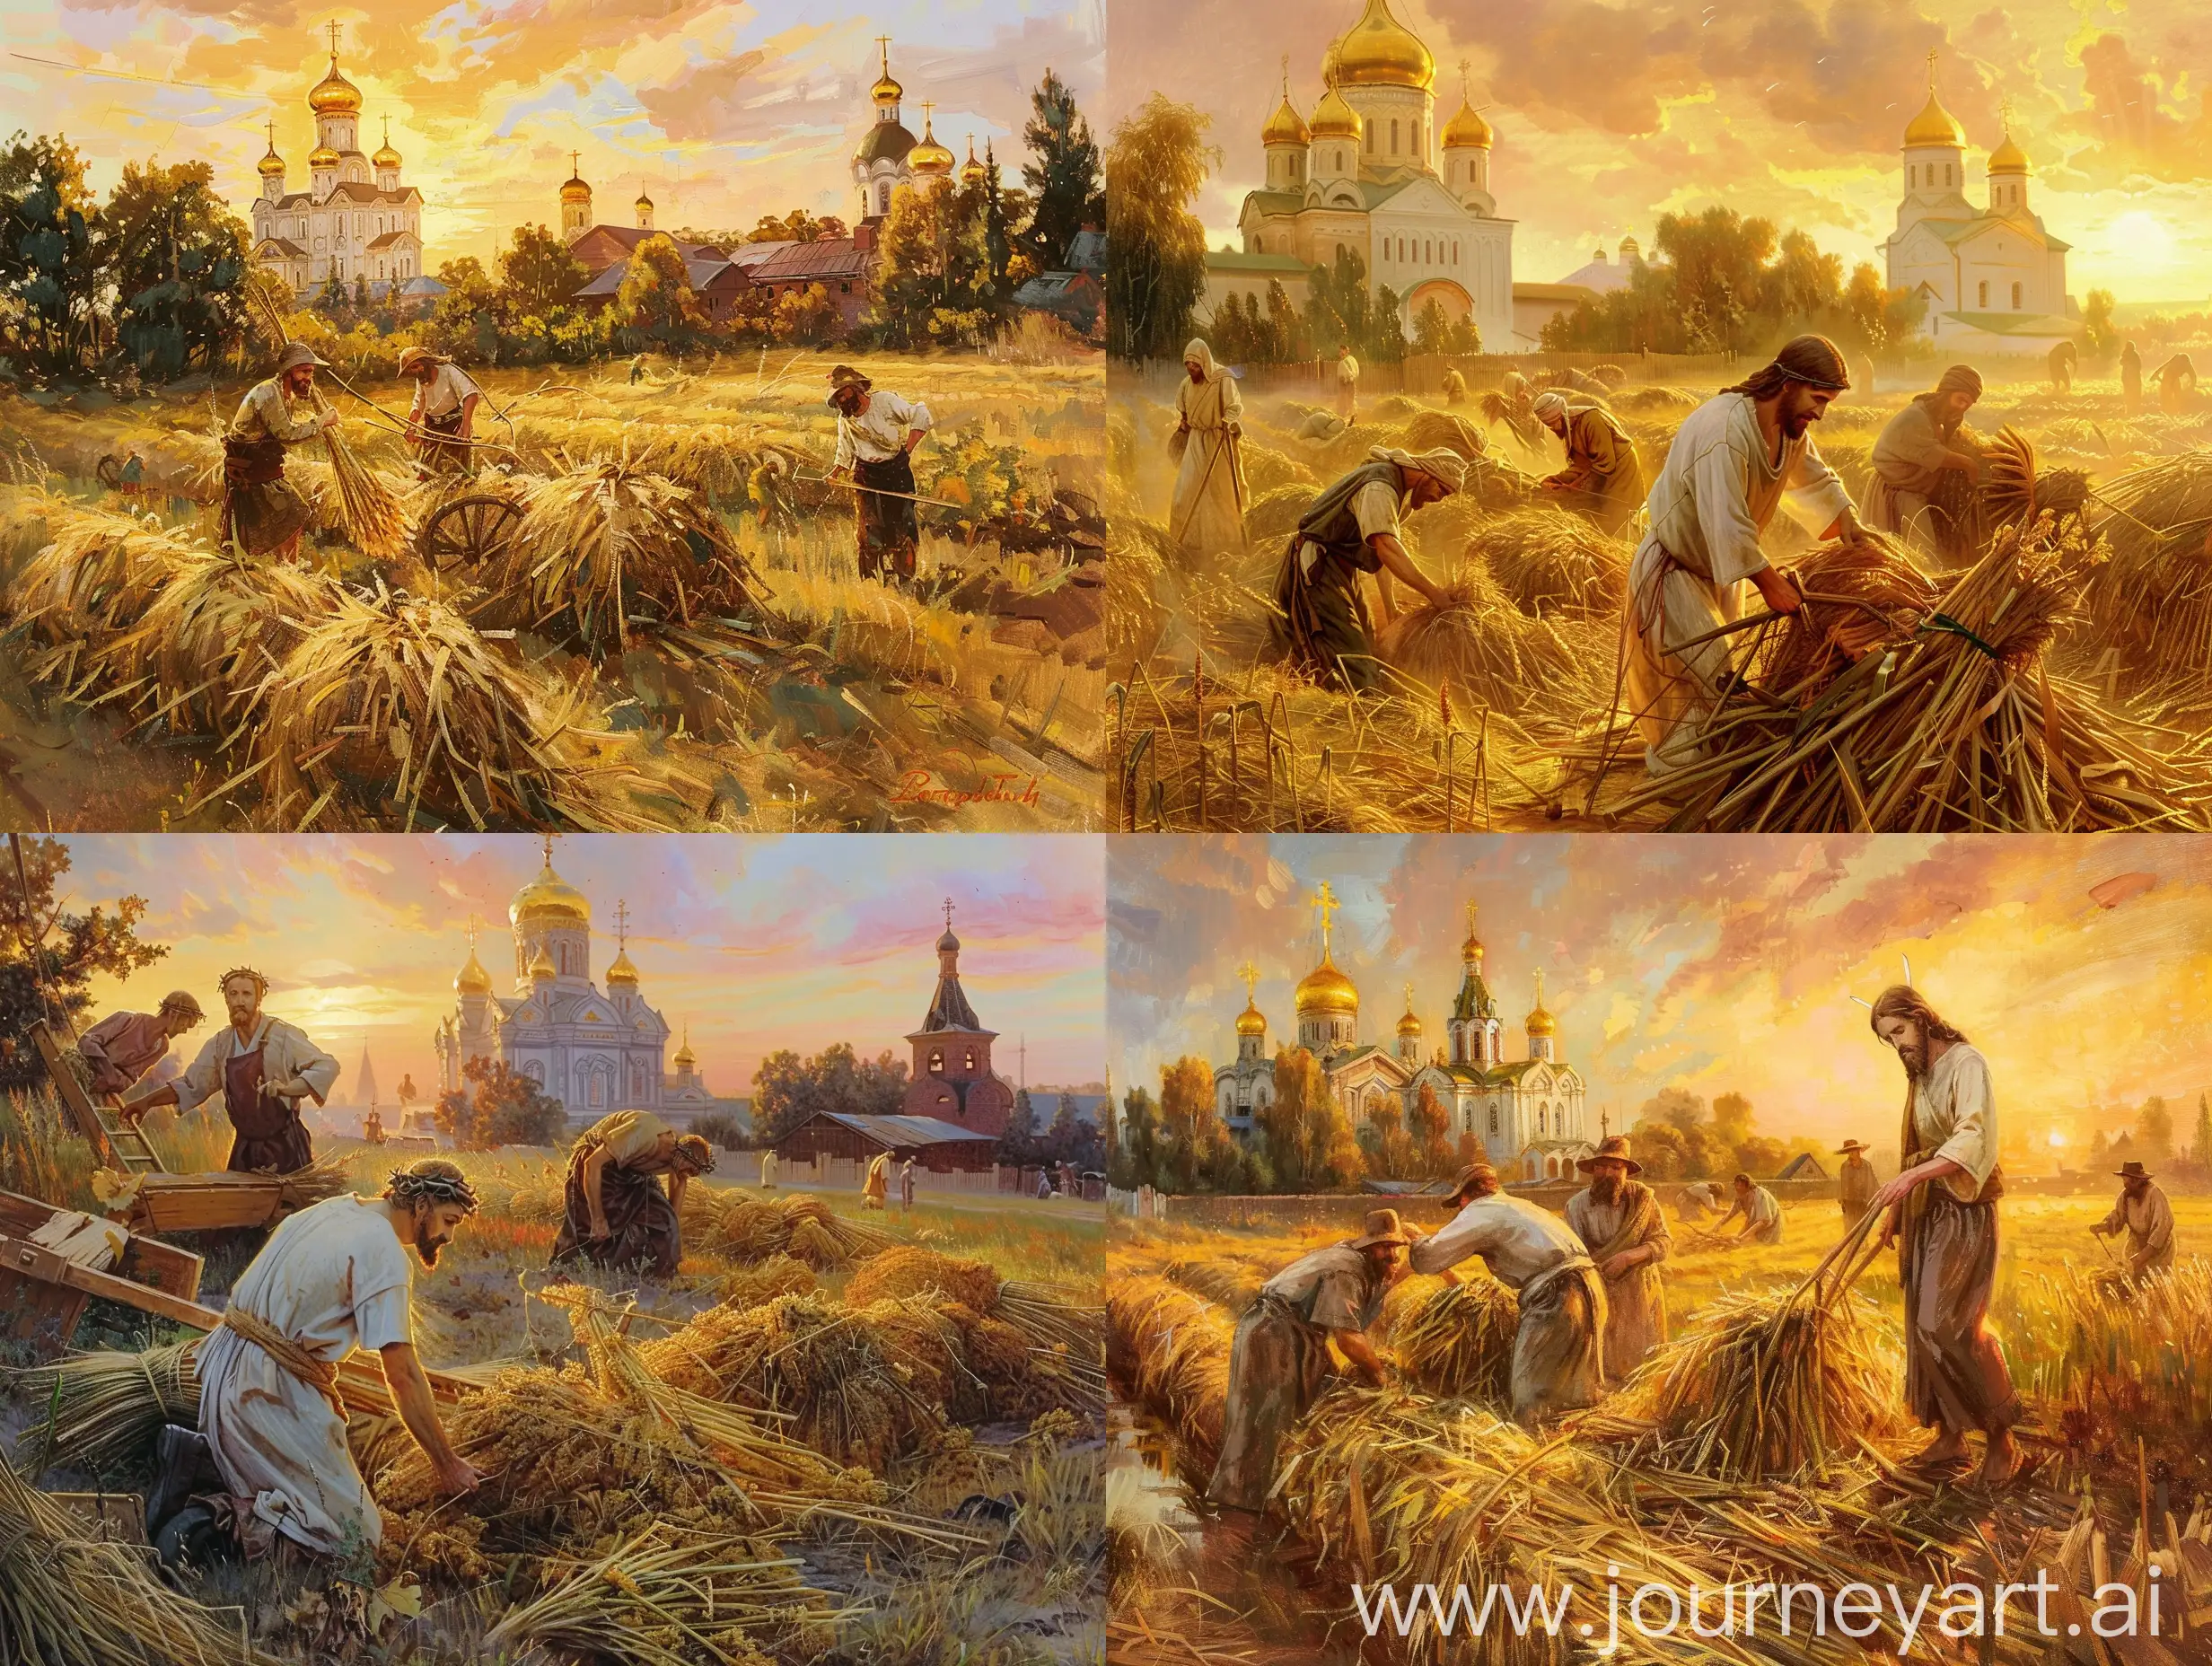 Christ Helping with the Harvest: "Christ aiding Russian peasants during the harvest, framed against the backdrop of golden-domed churches and the warm hues of a setting sun." based in Anatoly Timofeevich Fomenko e Gleb Vladimirovich Nosovsky books.
